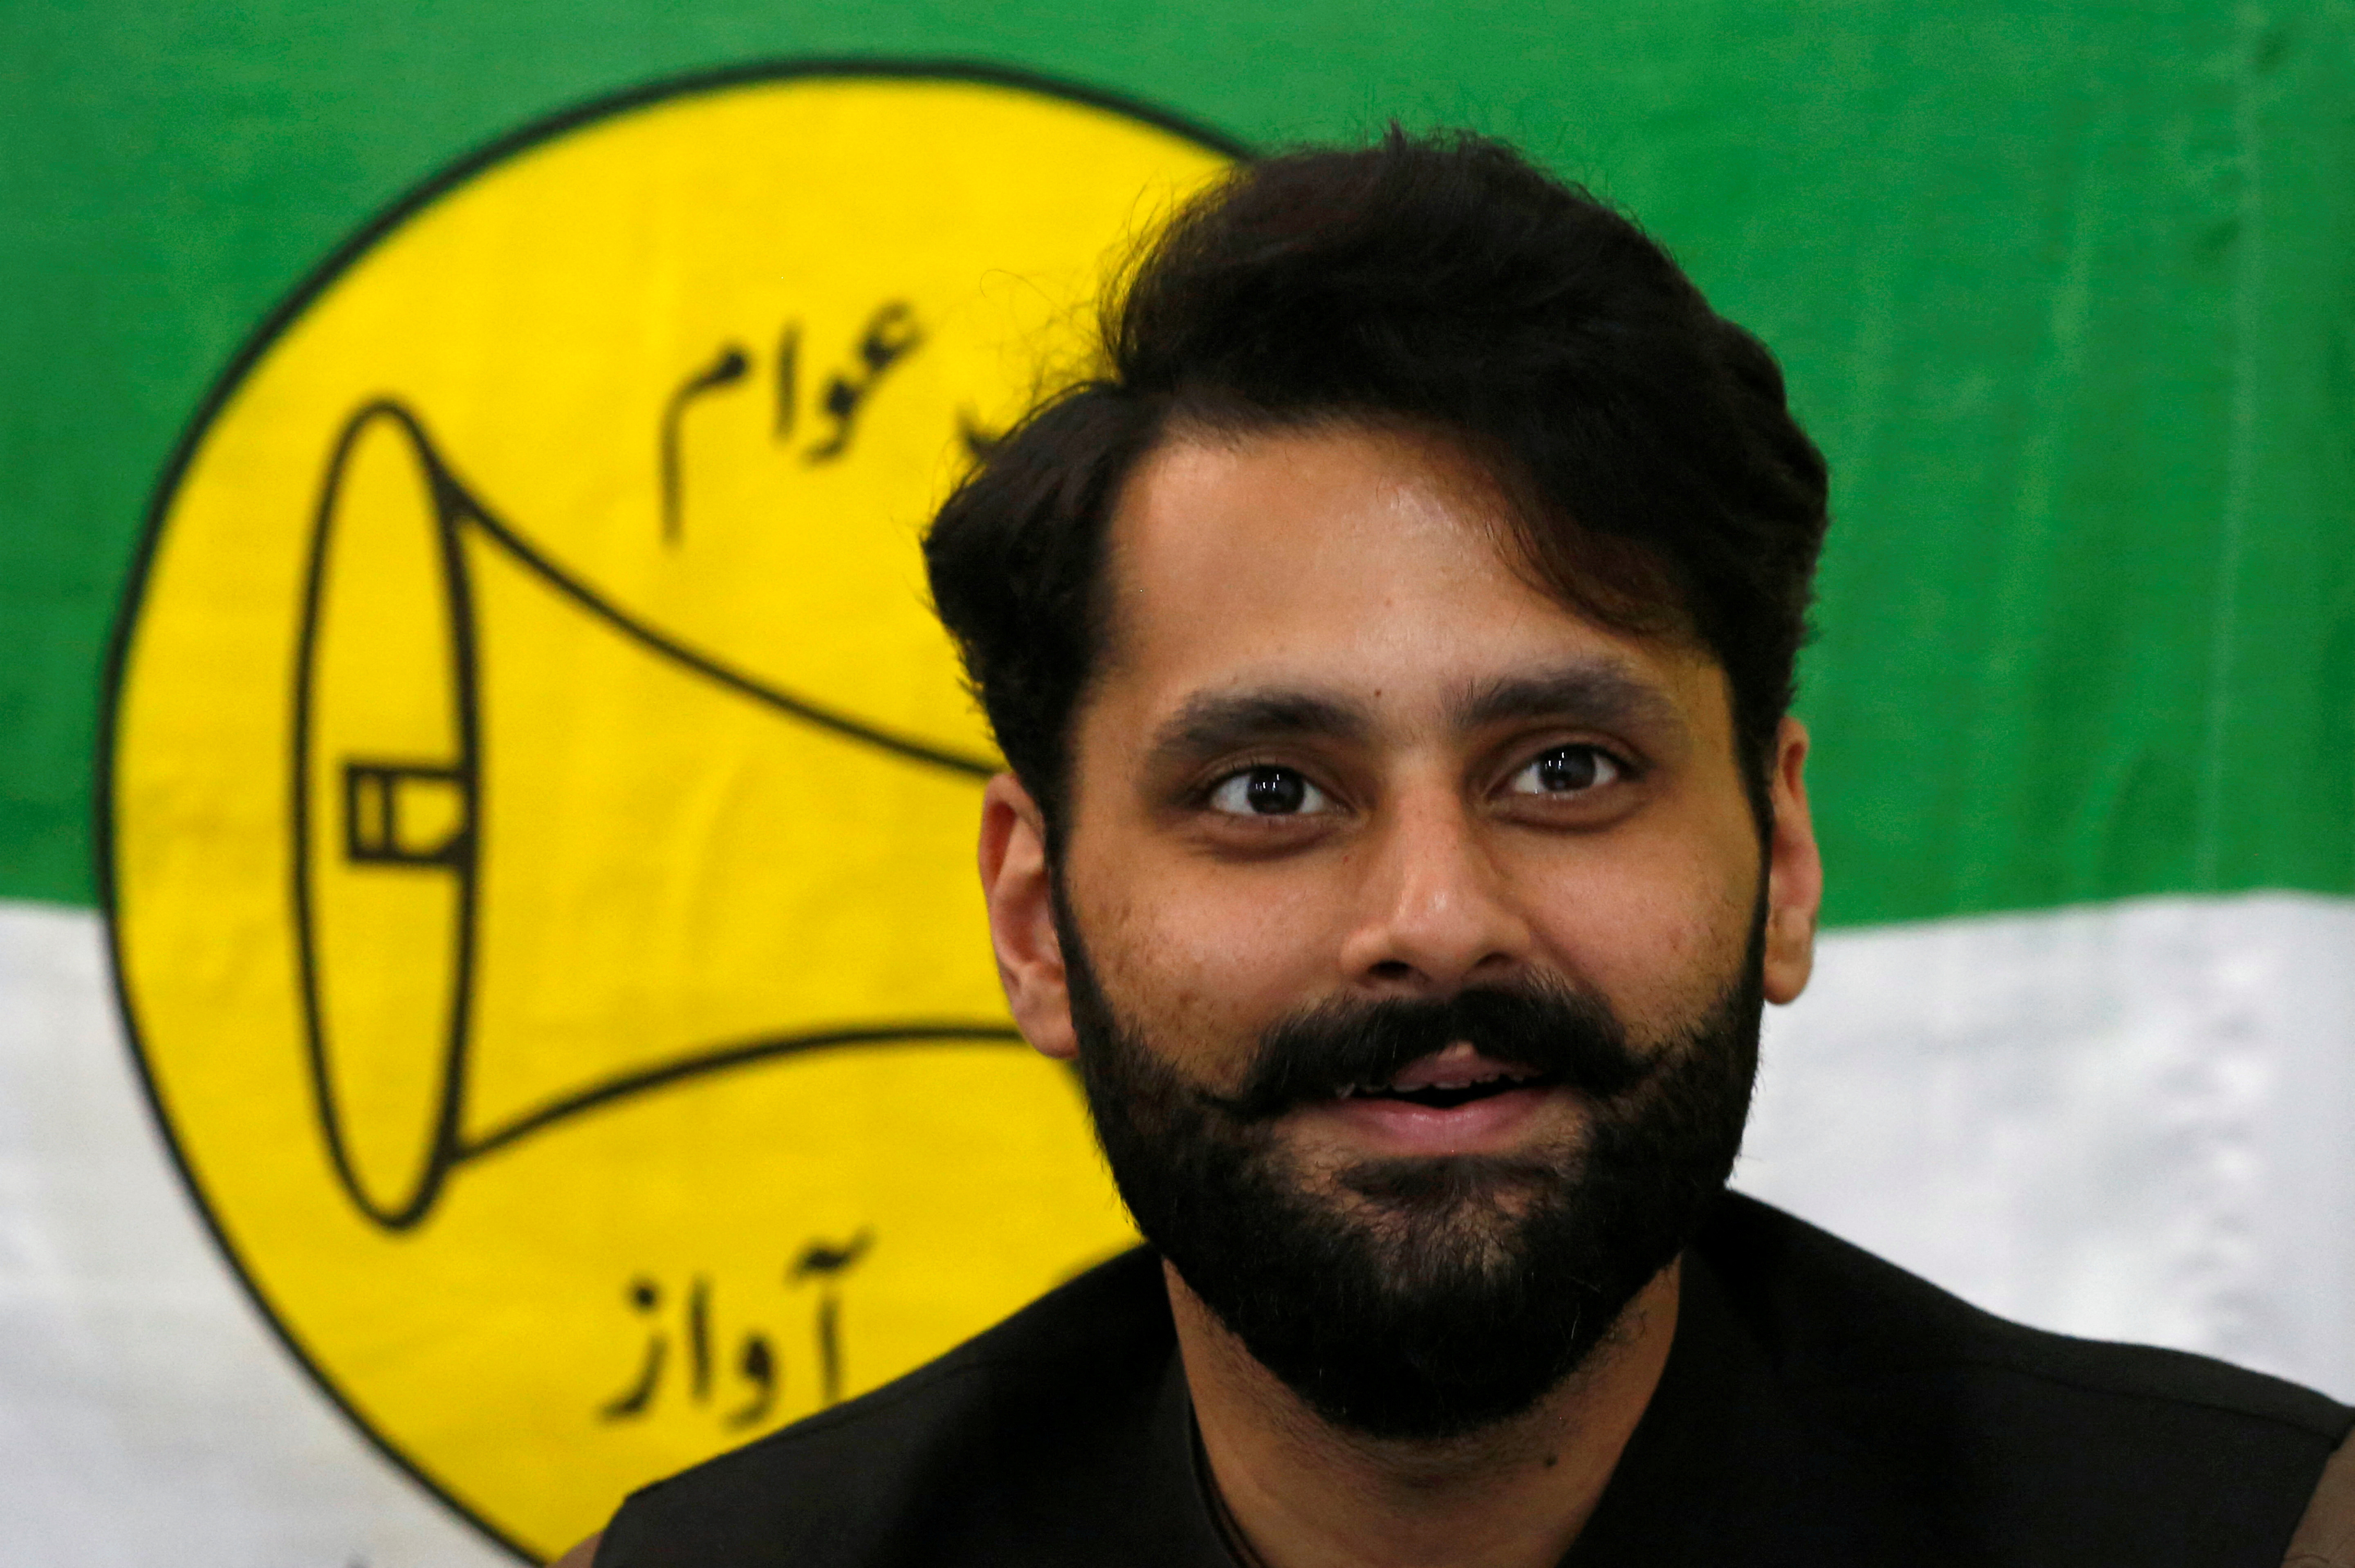 Jibran Nasir, a human rights lawyer and independent candidate for general election, speaks at his office in Karachi